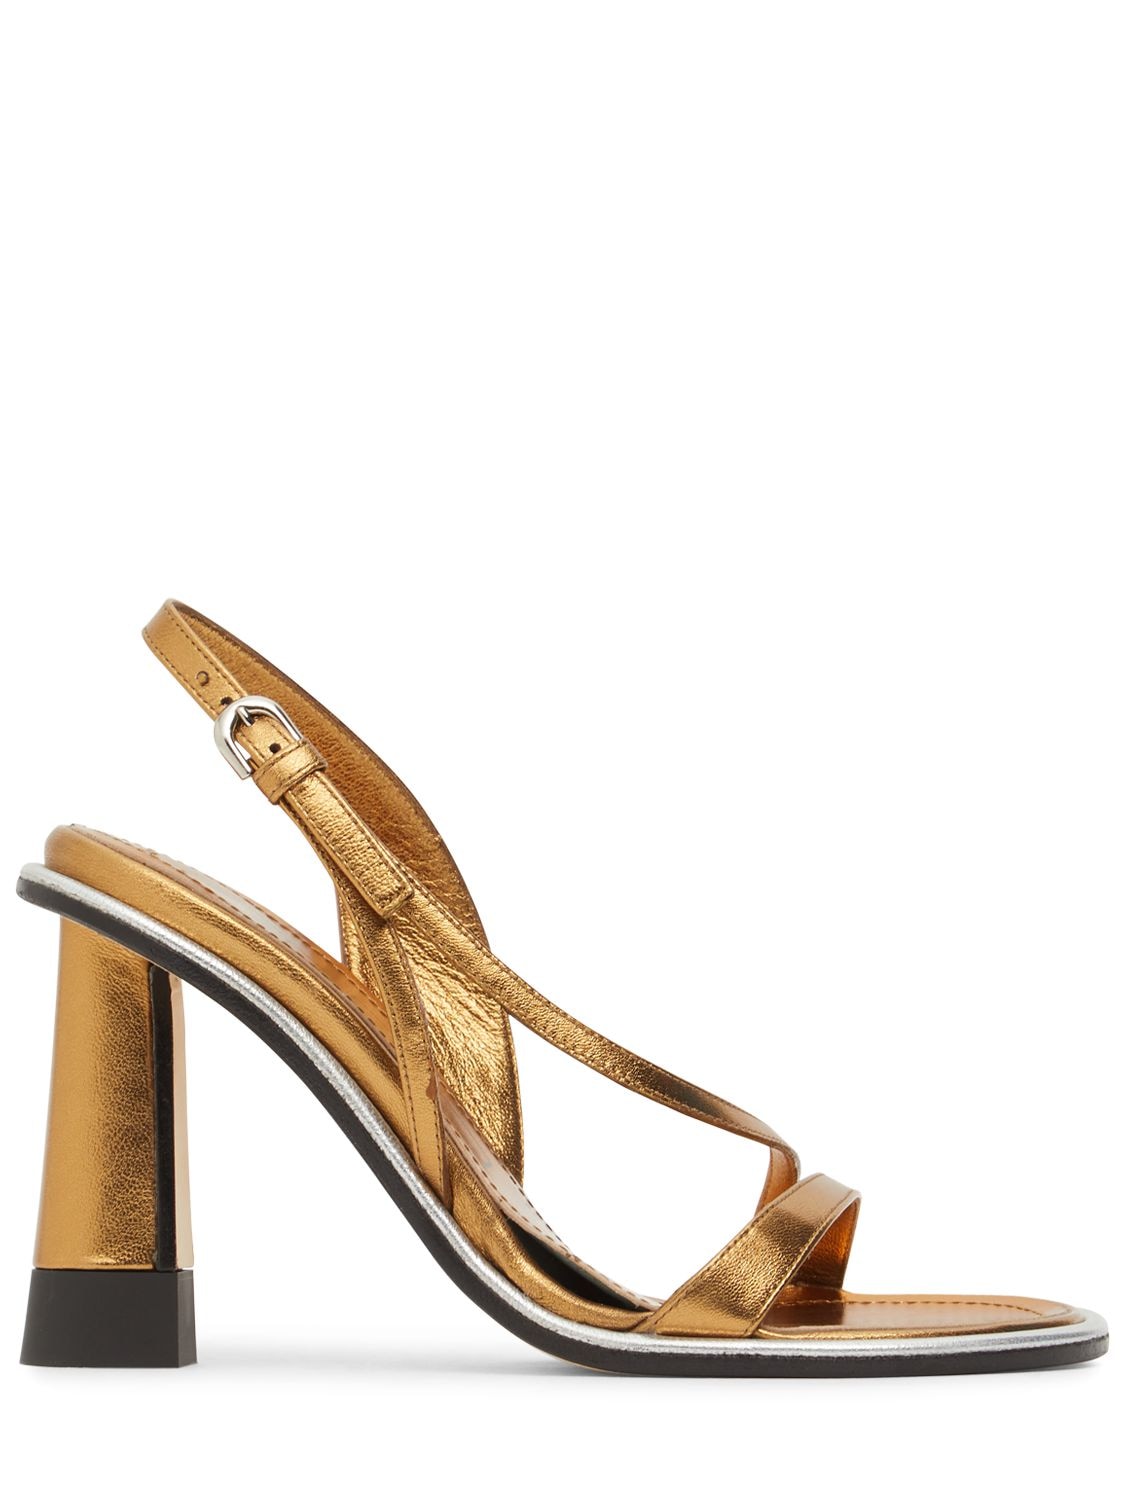 Shop Etro 100mm Metallic Leather Sandals In Gold